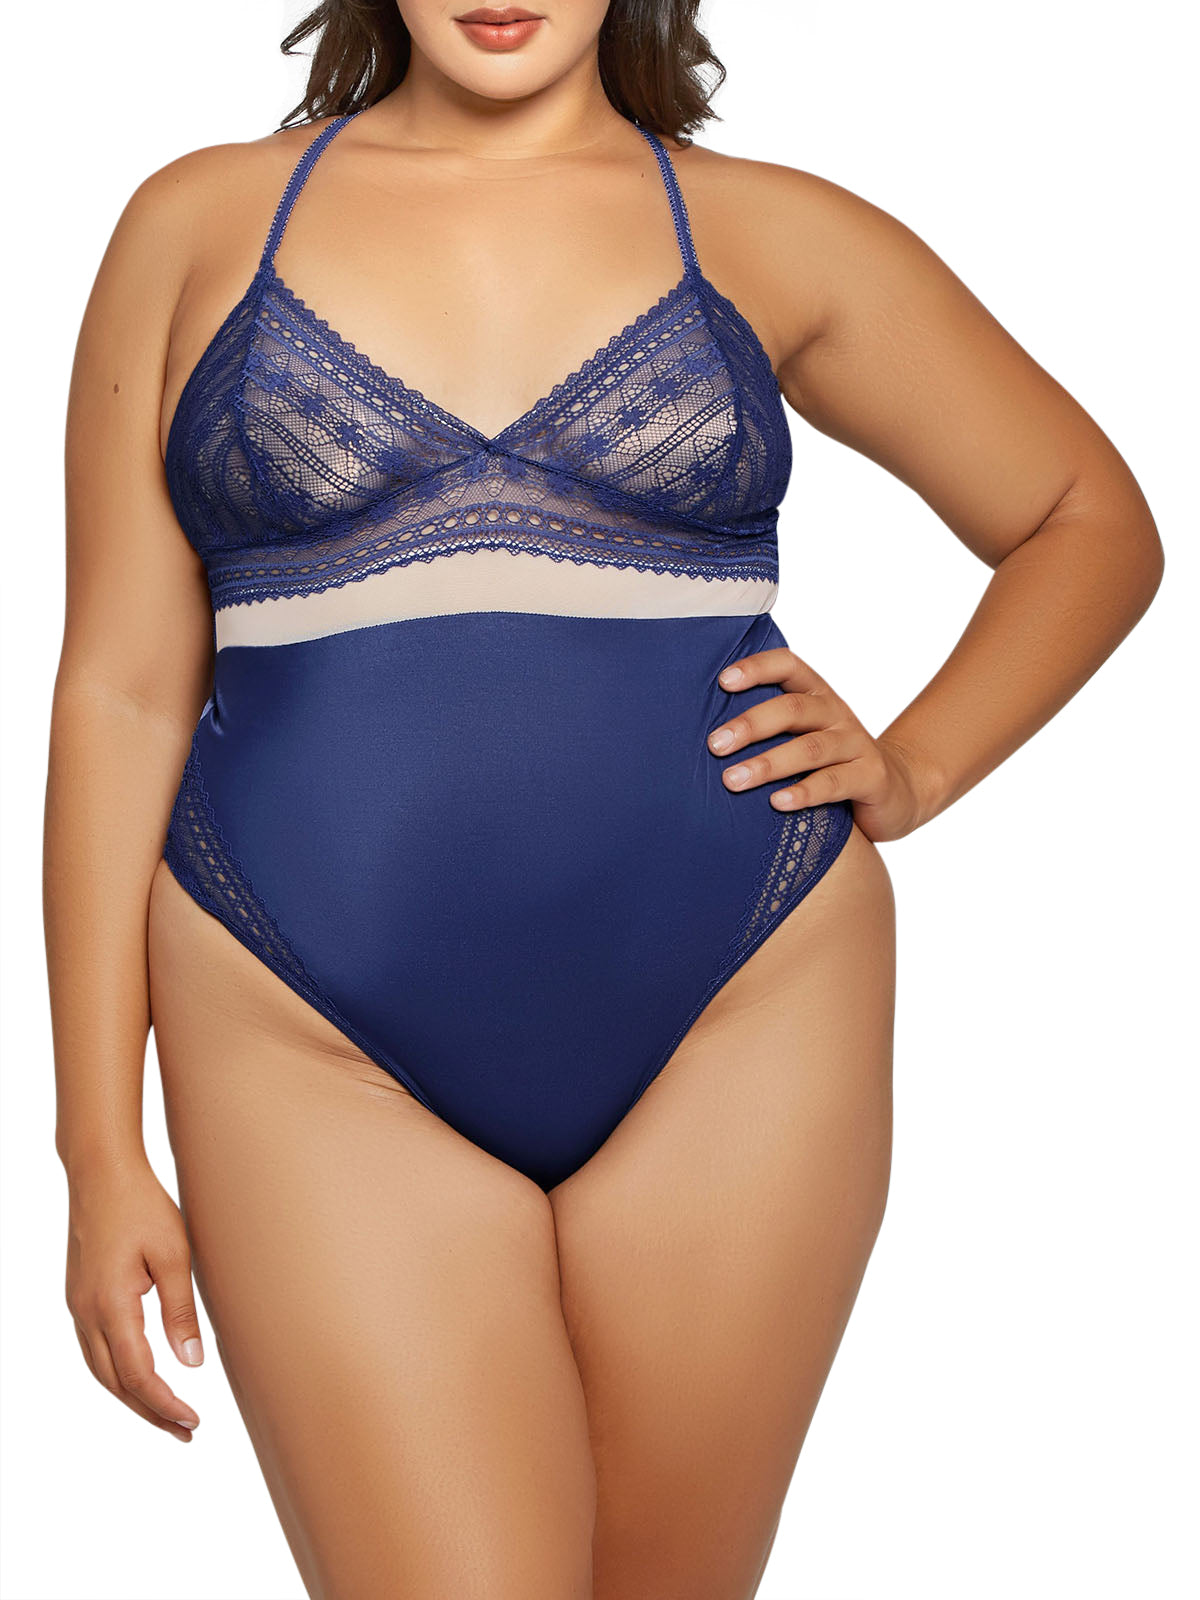 iCollection Clover Plus Size Teddy